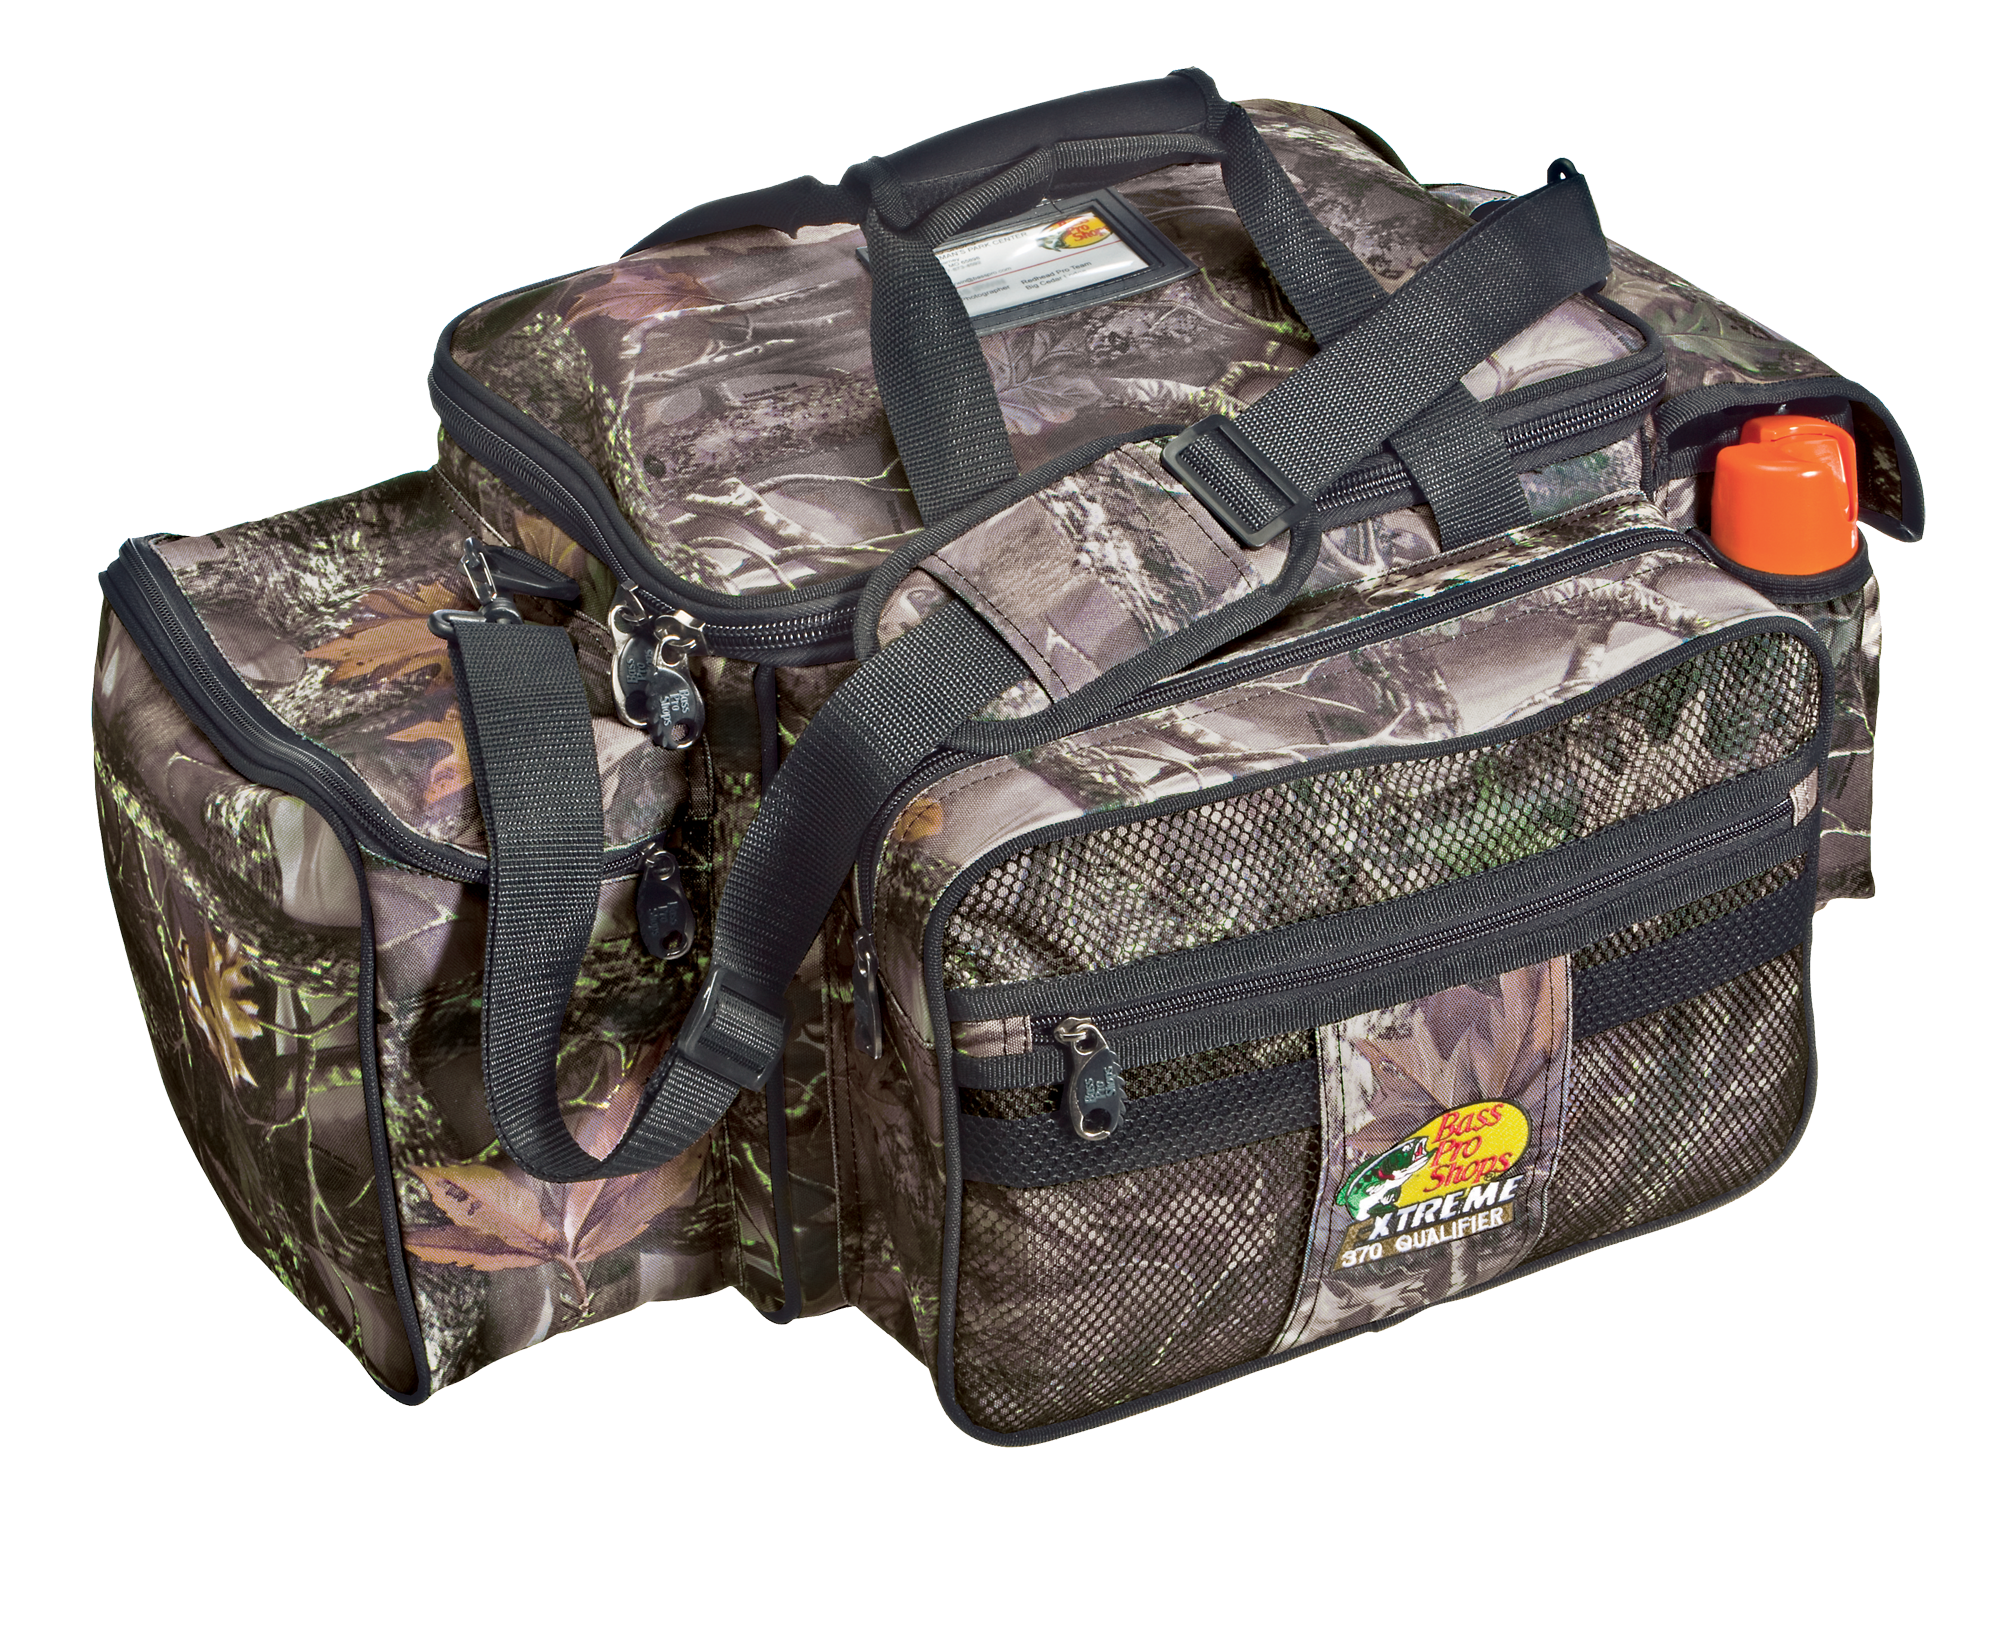 Bass Pro Shops Extreme Qualifier 370 Camo Tackle Bag or System